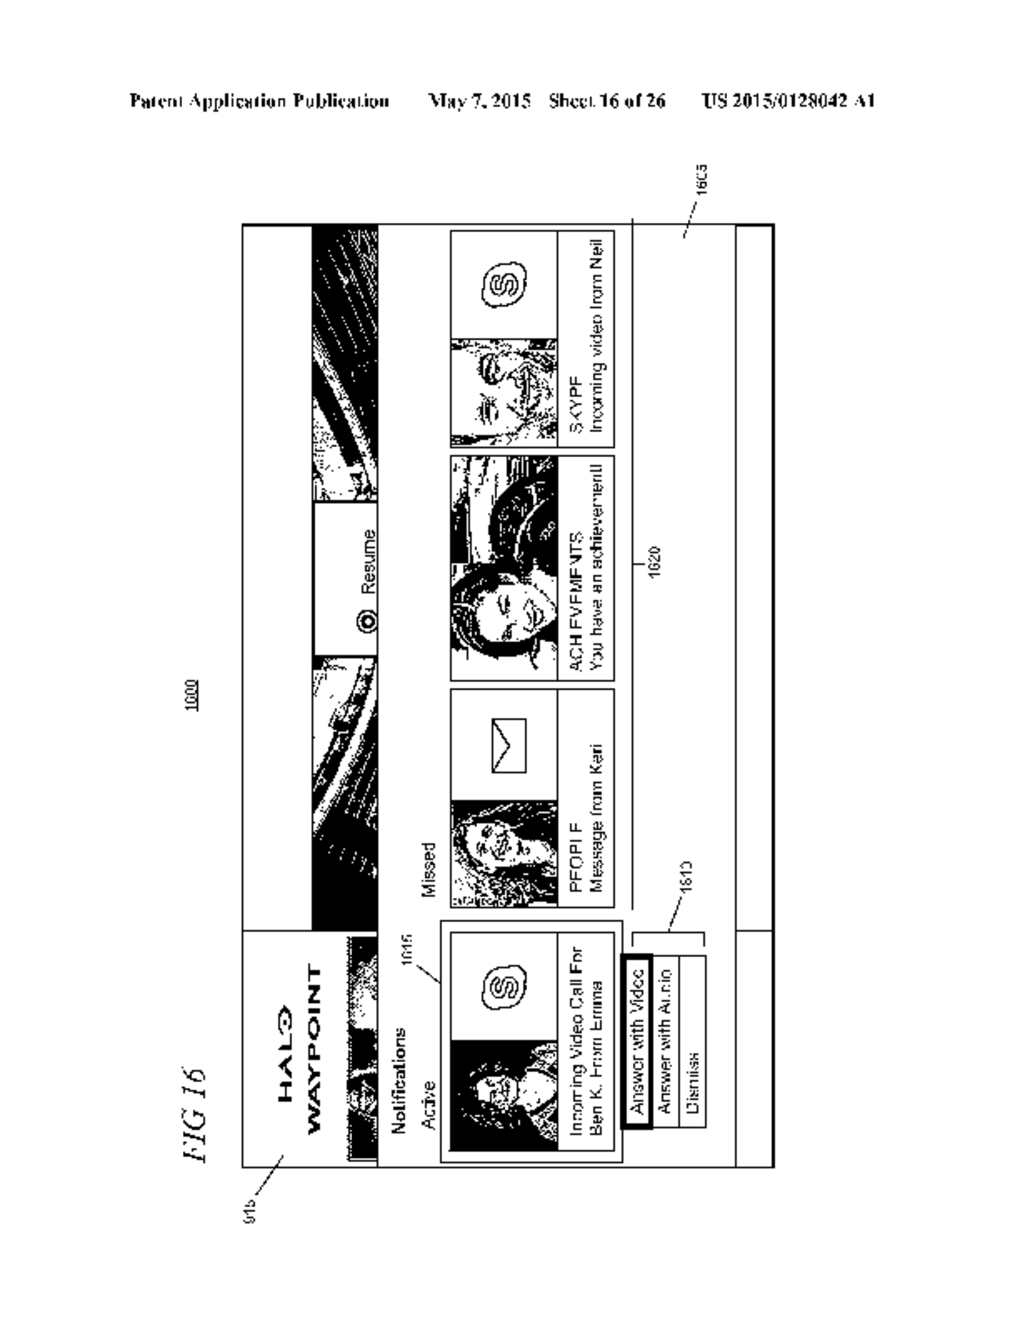 MULTITASKING EXPERIENCES WITH INTERACTIVE PICTURE-IN-PICTURE - diagram, schematic, and image 17